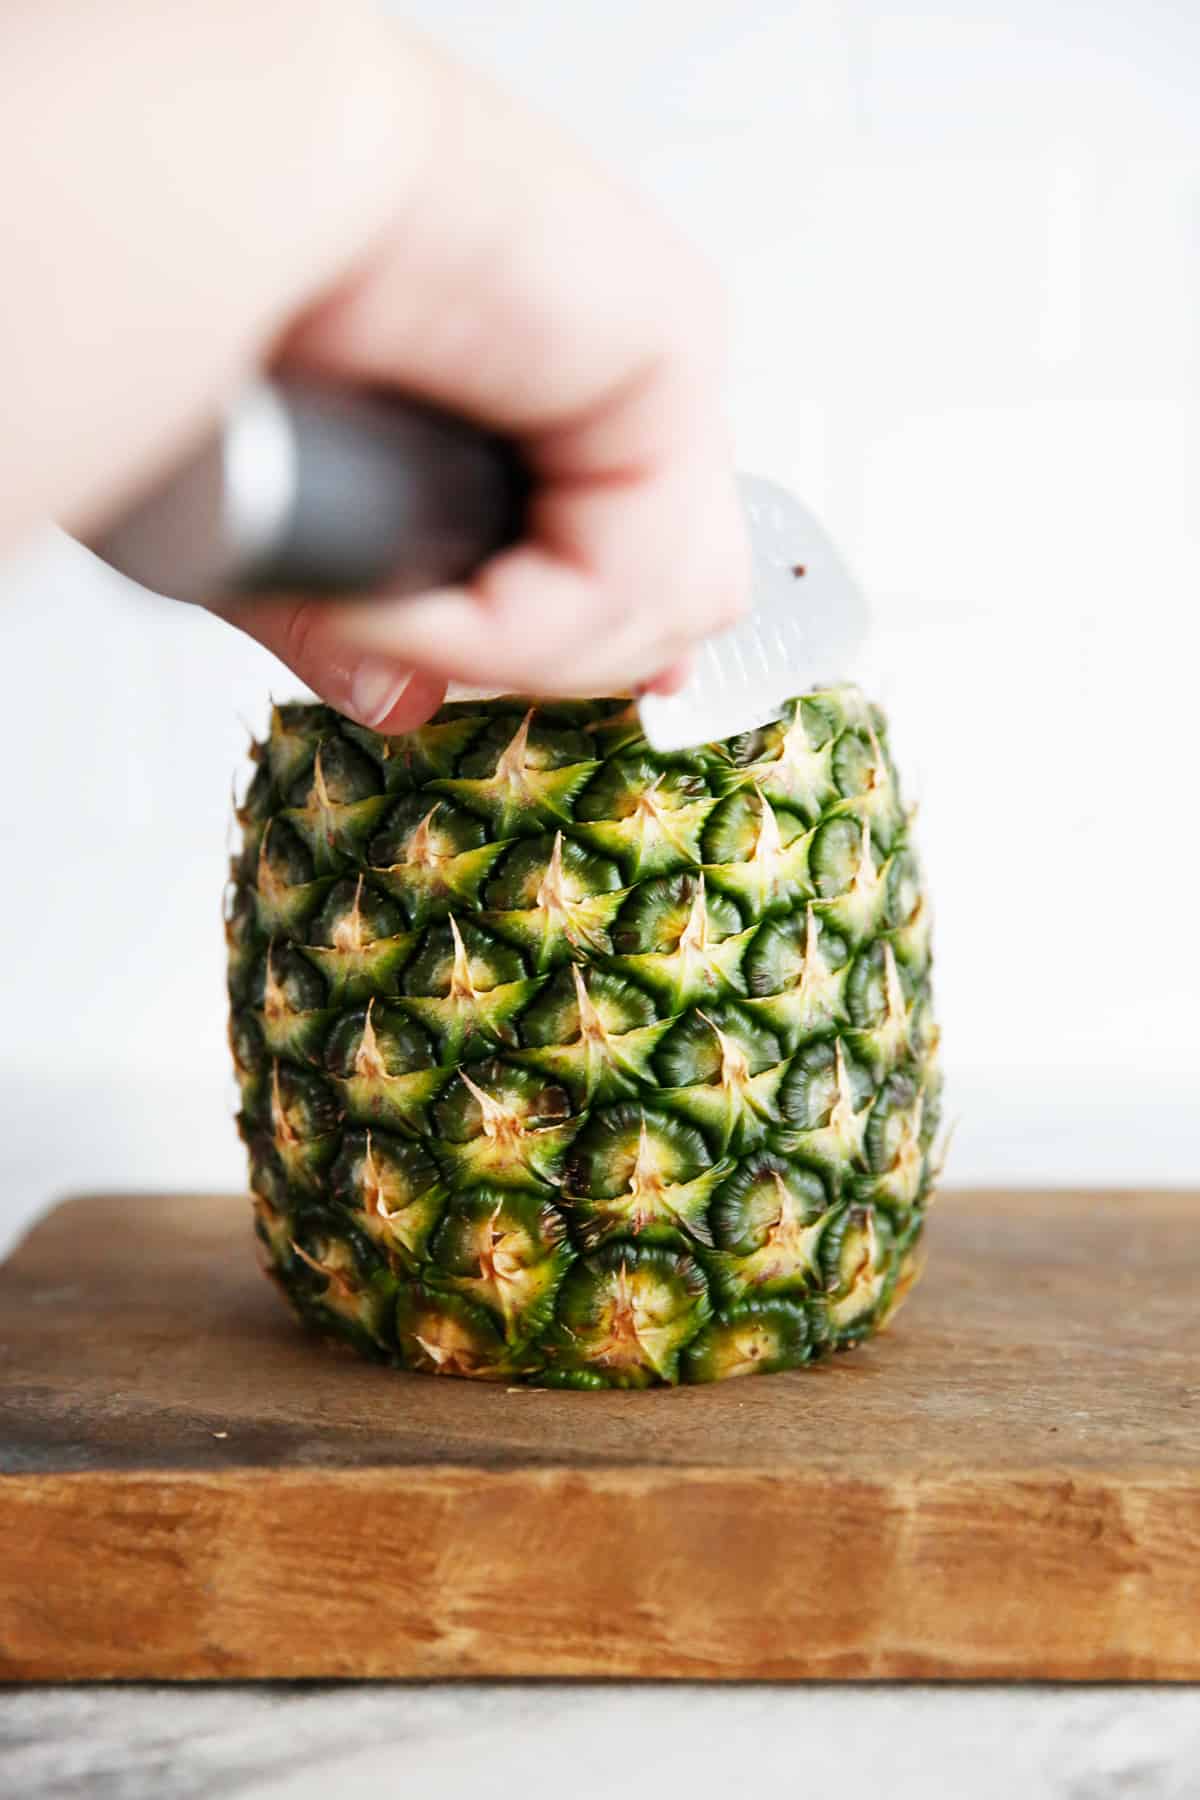 How To Cut and Pick A Pineapple